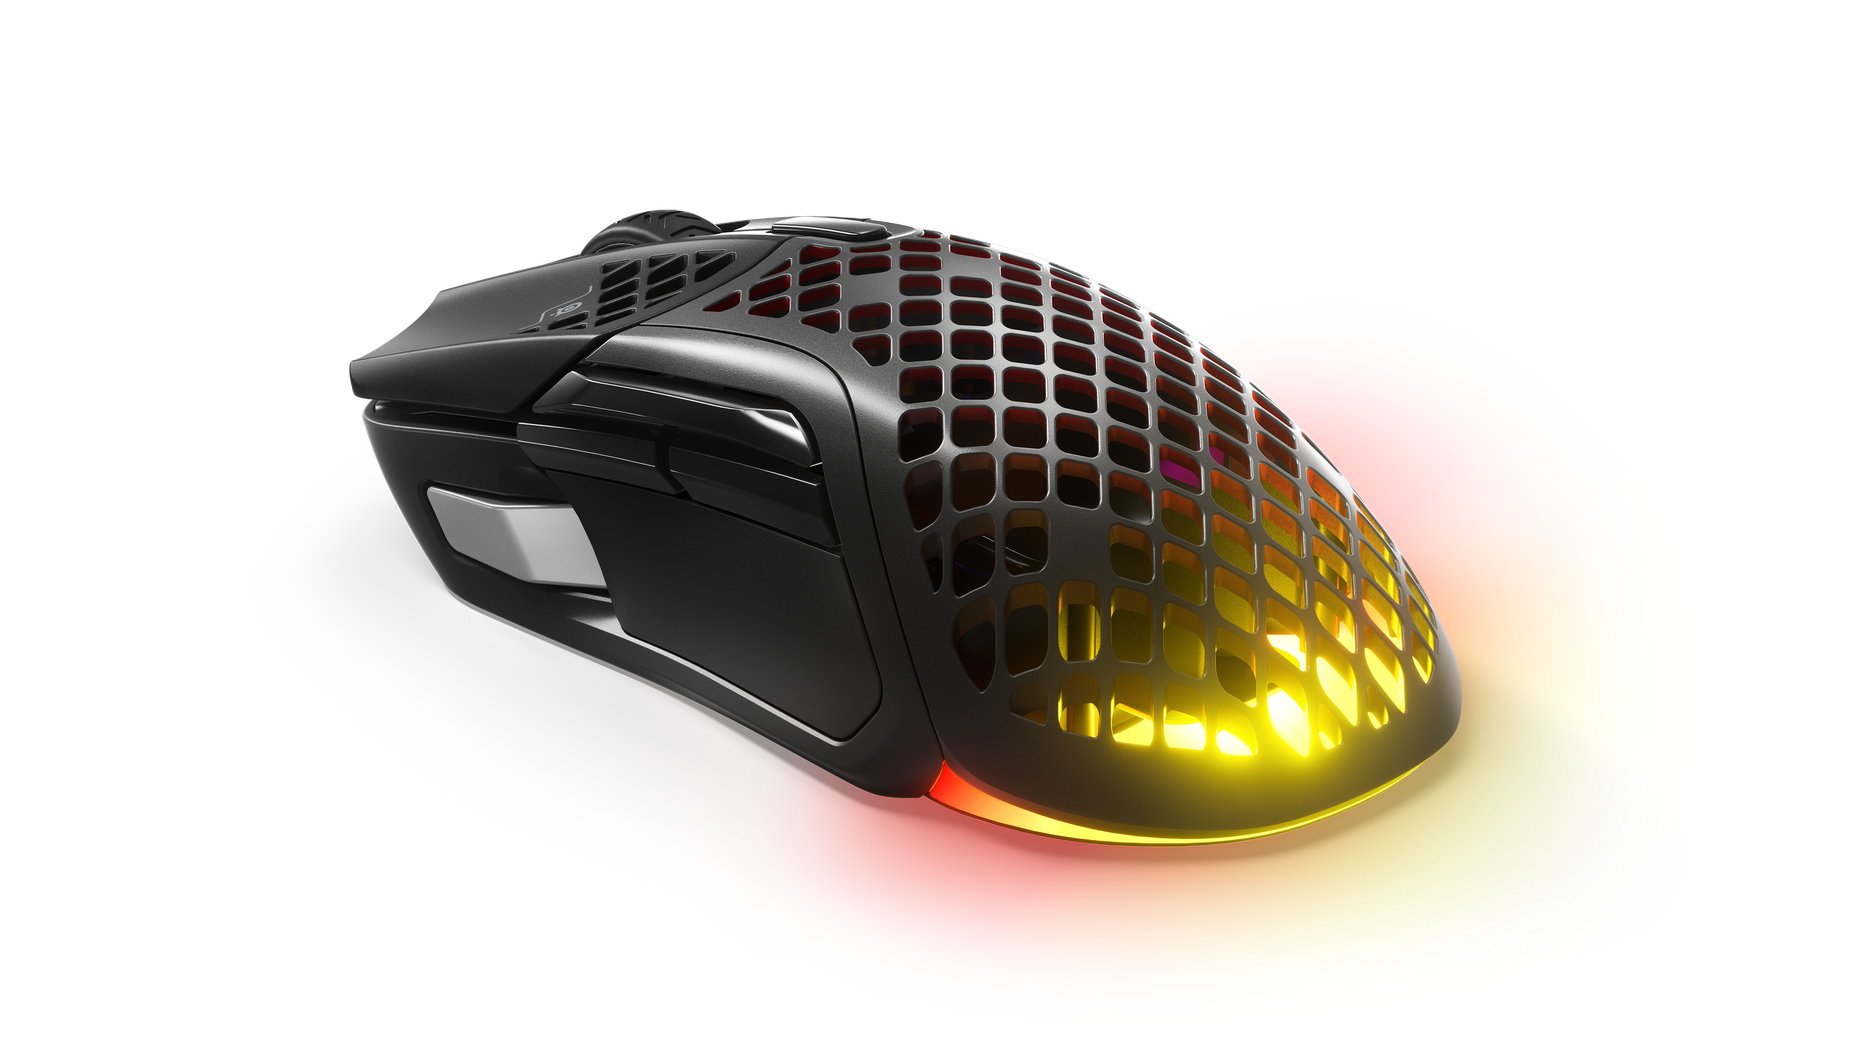 
 An angled view of the Aerox 5 Wireless mouse showing off its palm rest.
 